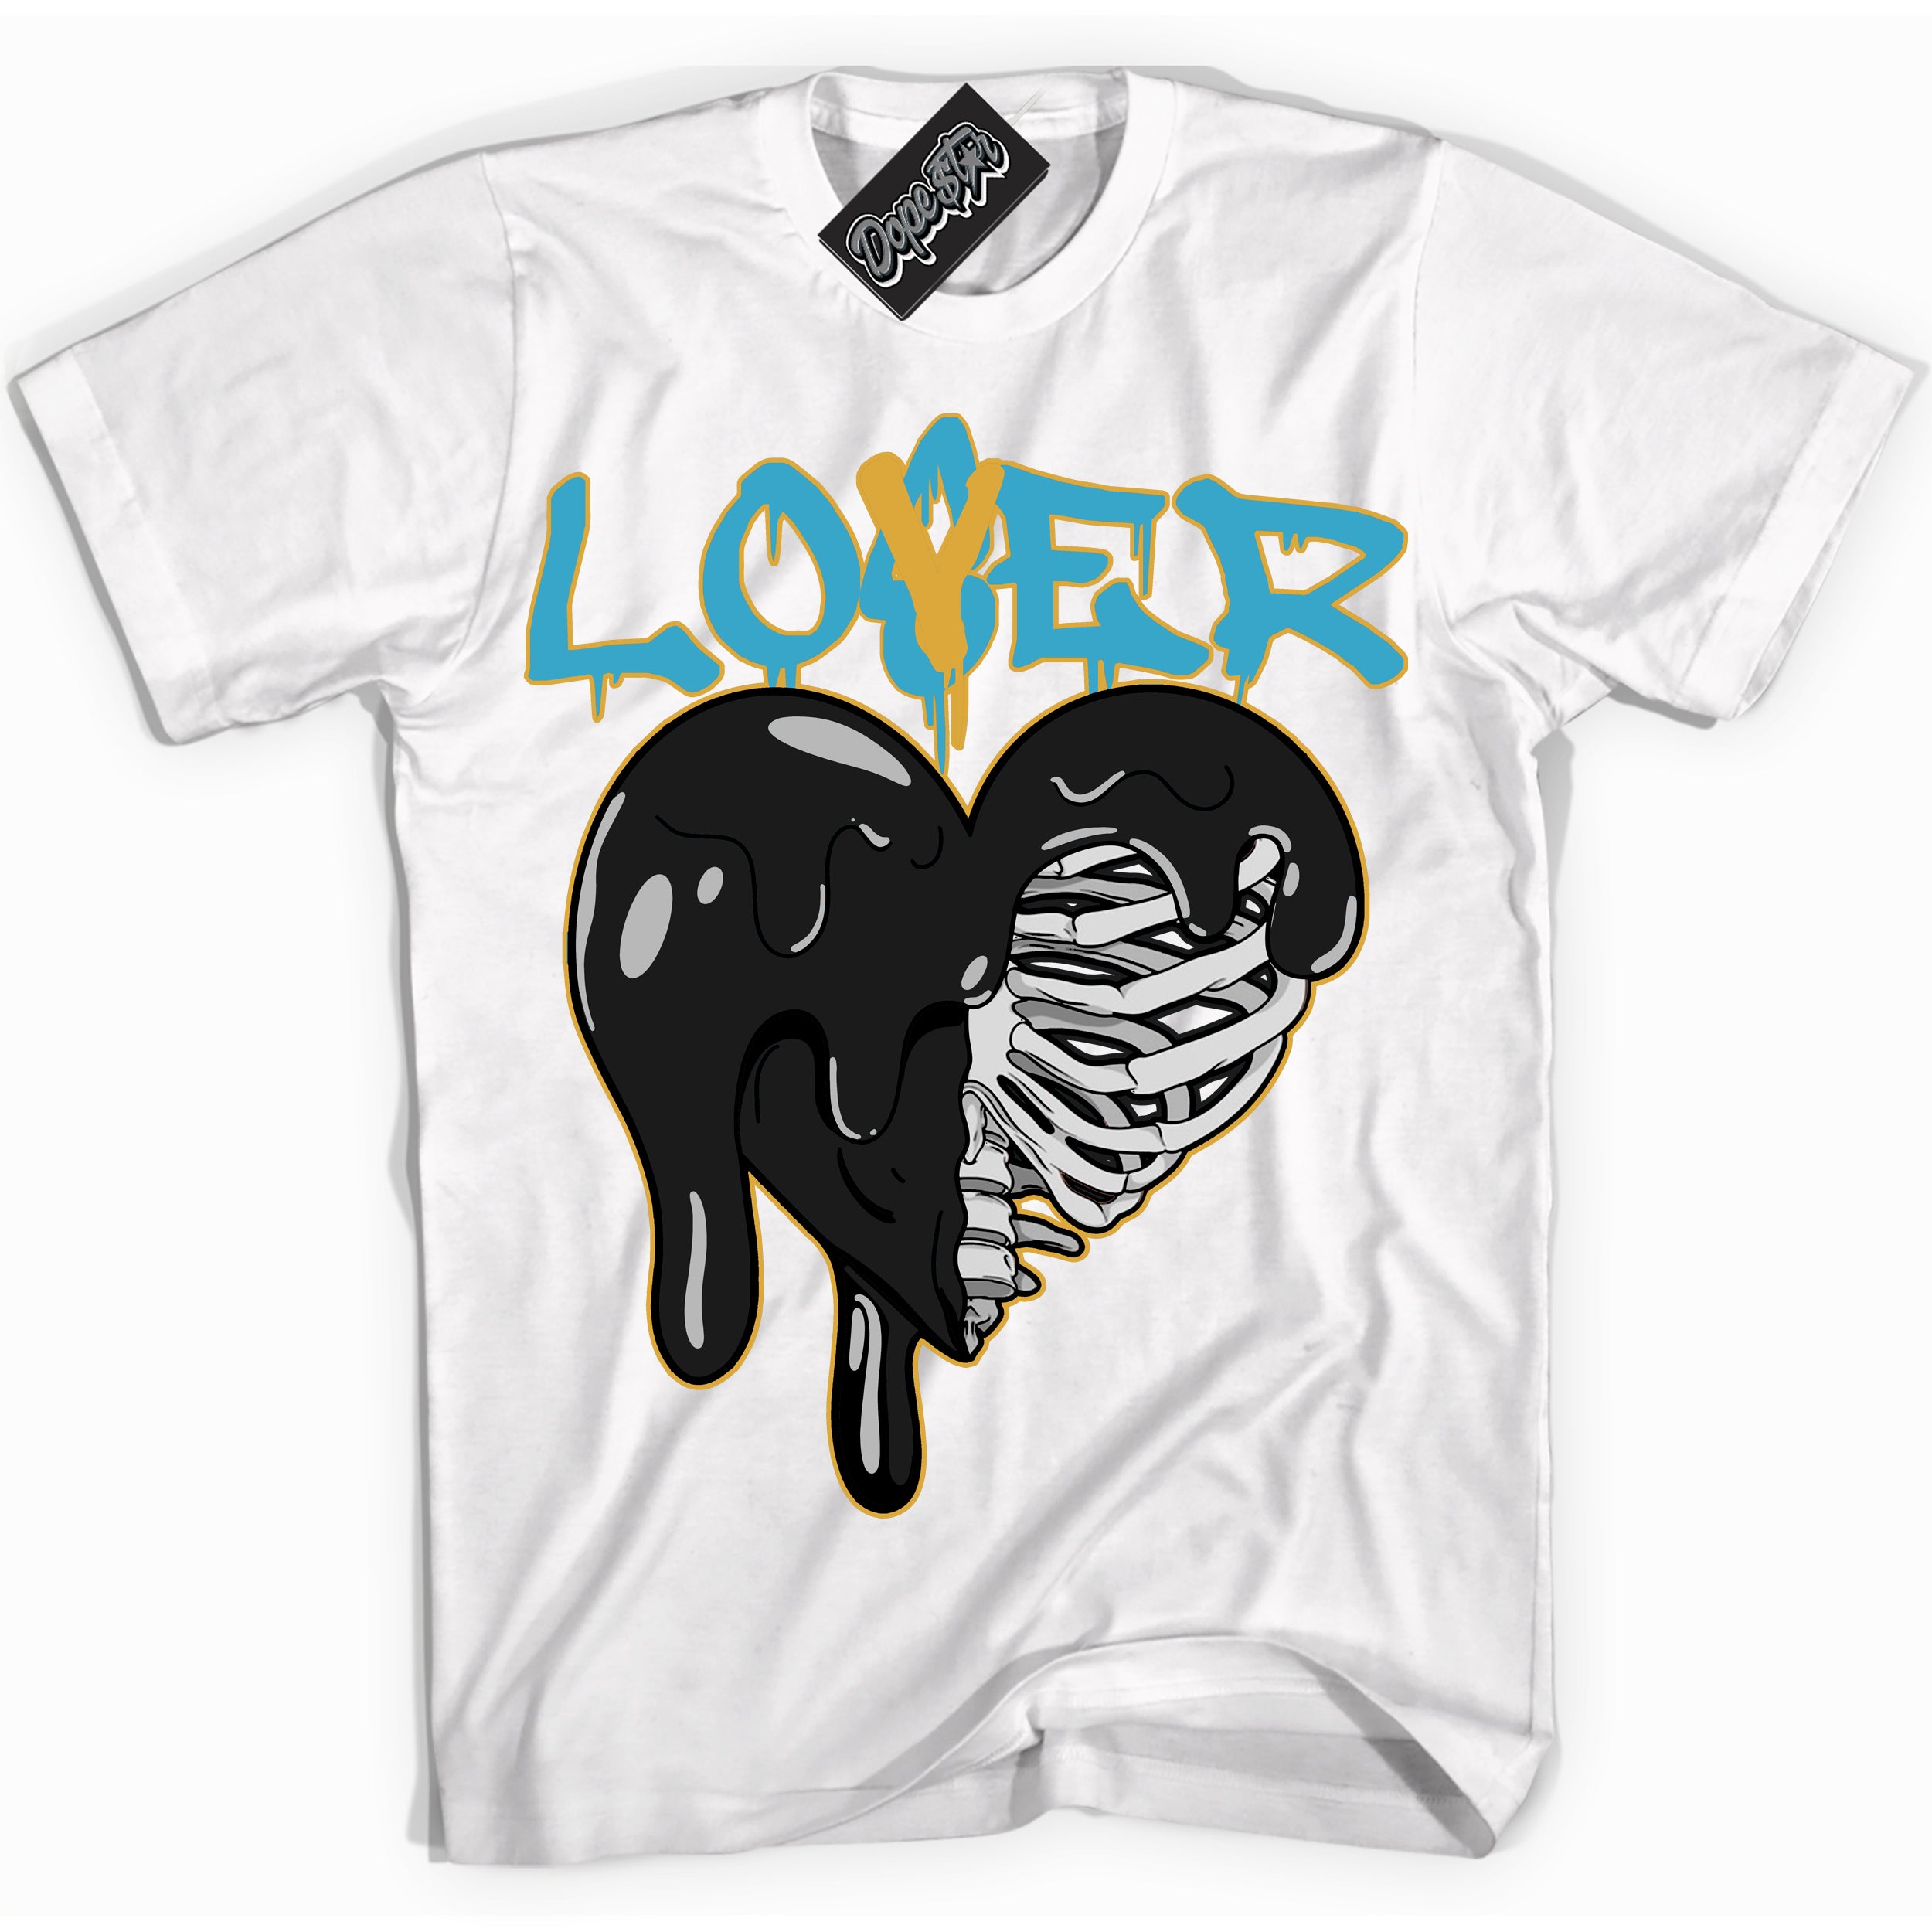 Cool White Shirt with “ Lover Loser” design that perfectly matches Aqua 5s Sneakers.